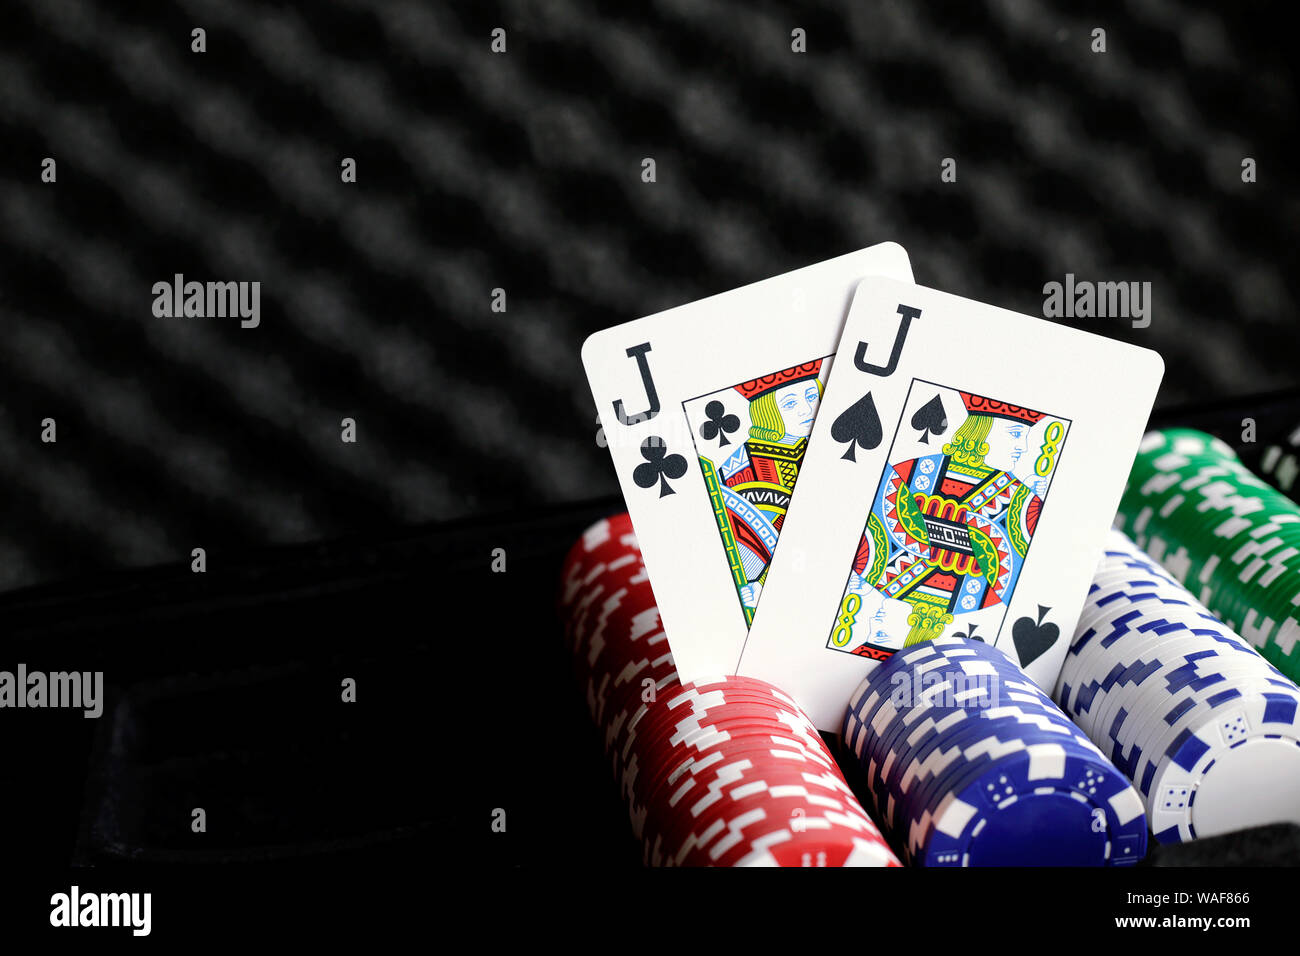 Pair of jacks playing cards upright on top of poker chips Stock Photo